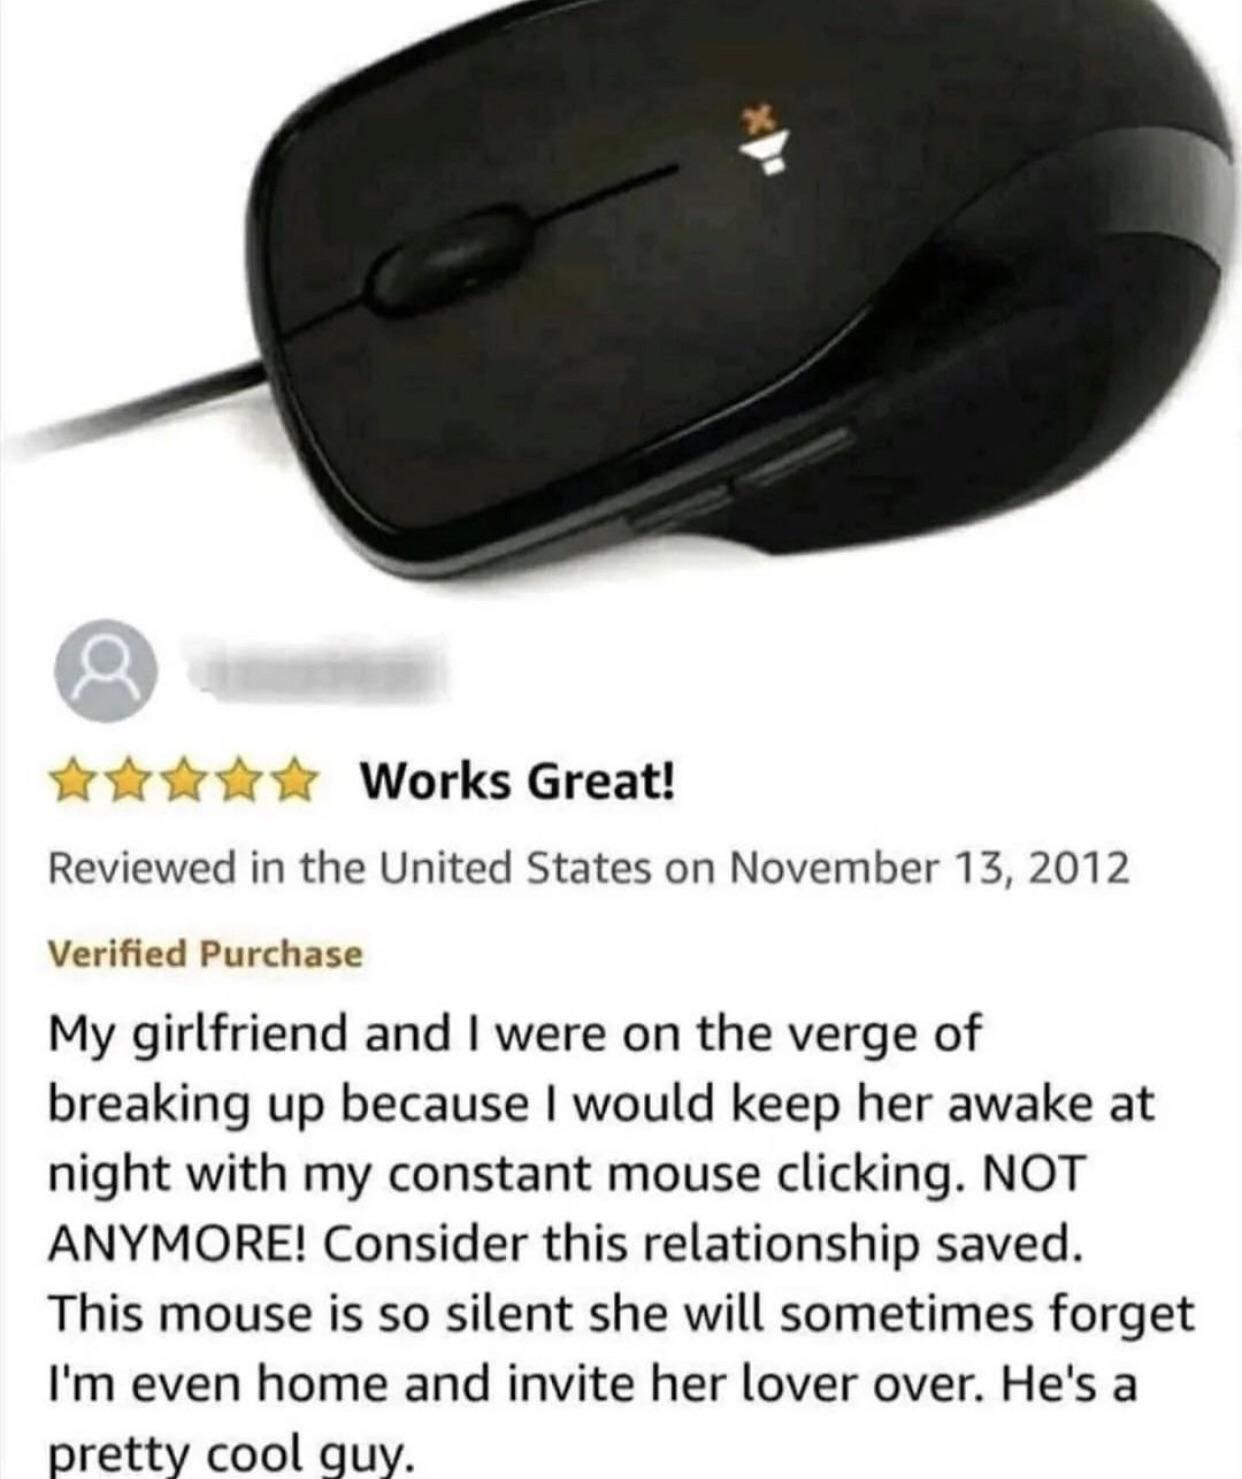 Would you but this mouse?